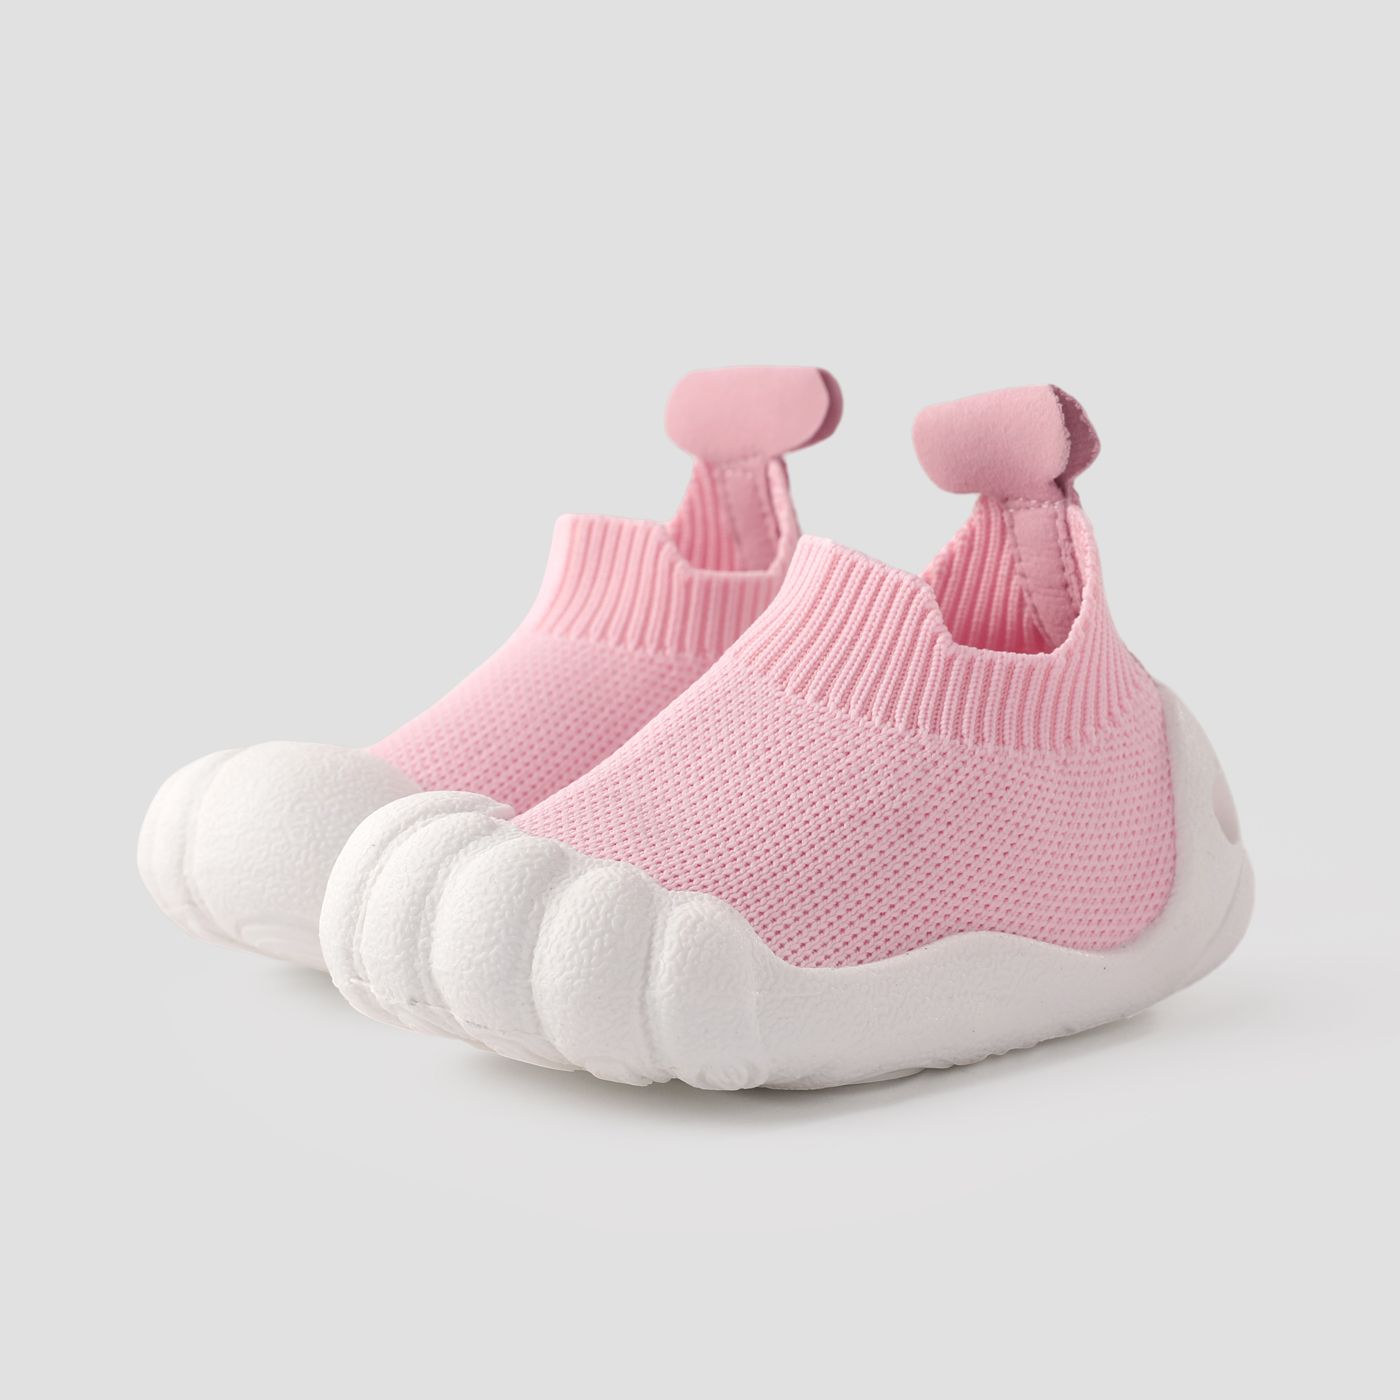 Toddlers And Kids Unique Toe Cap Design Breathable Casual Shoes